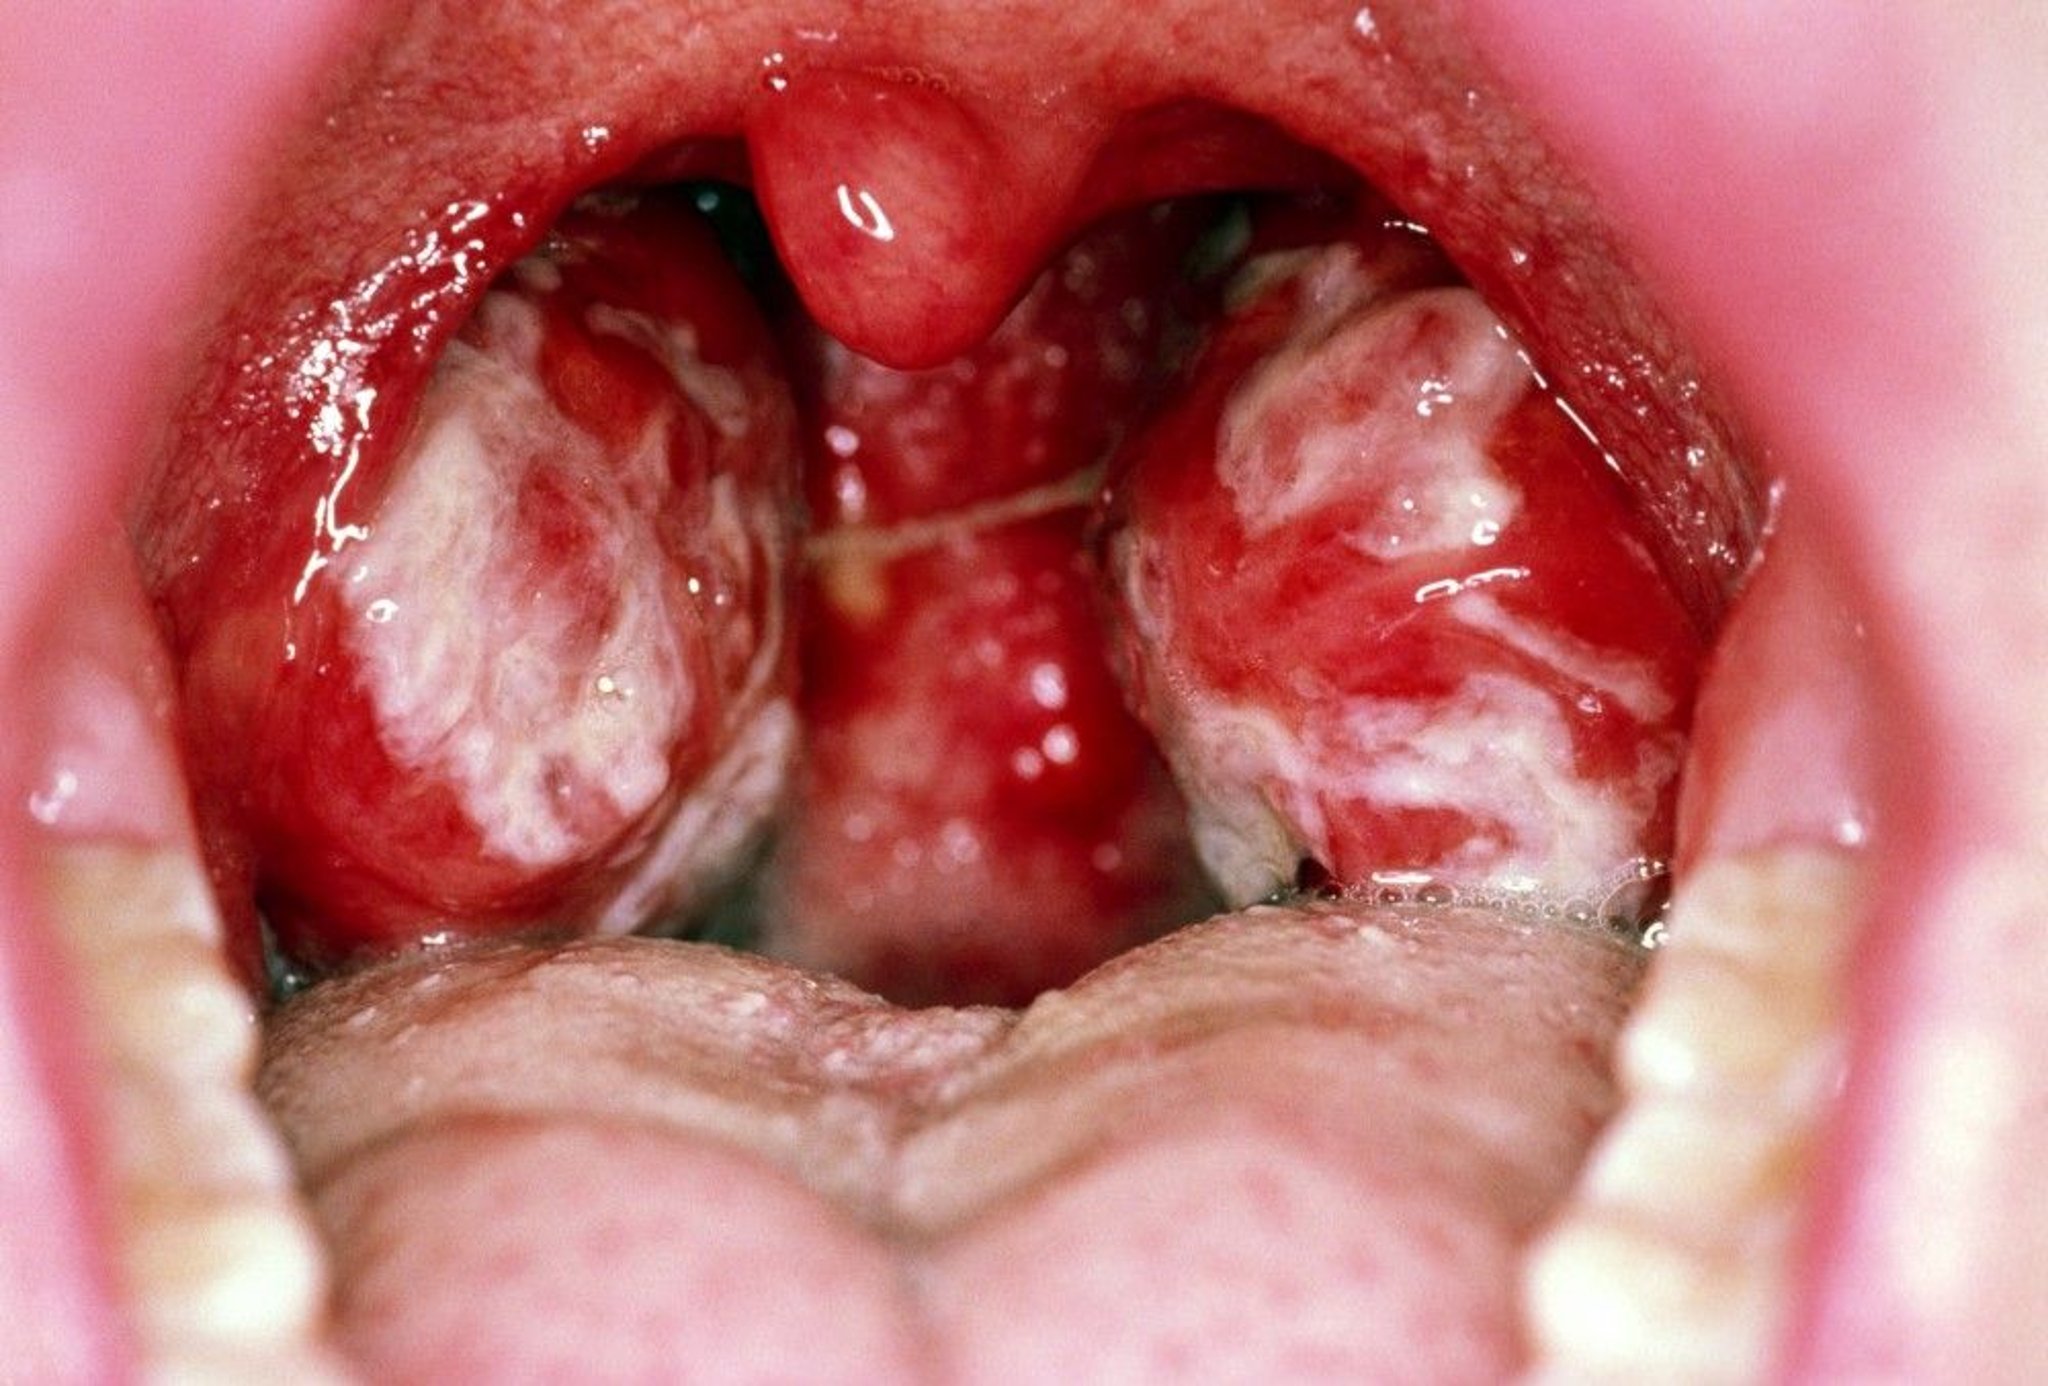 Infectious Mononucleosis That Affects the Throat